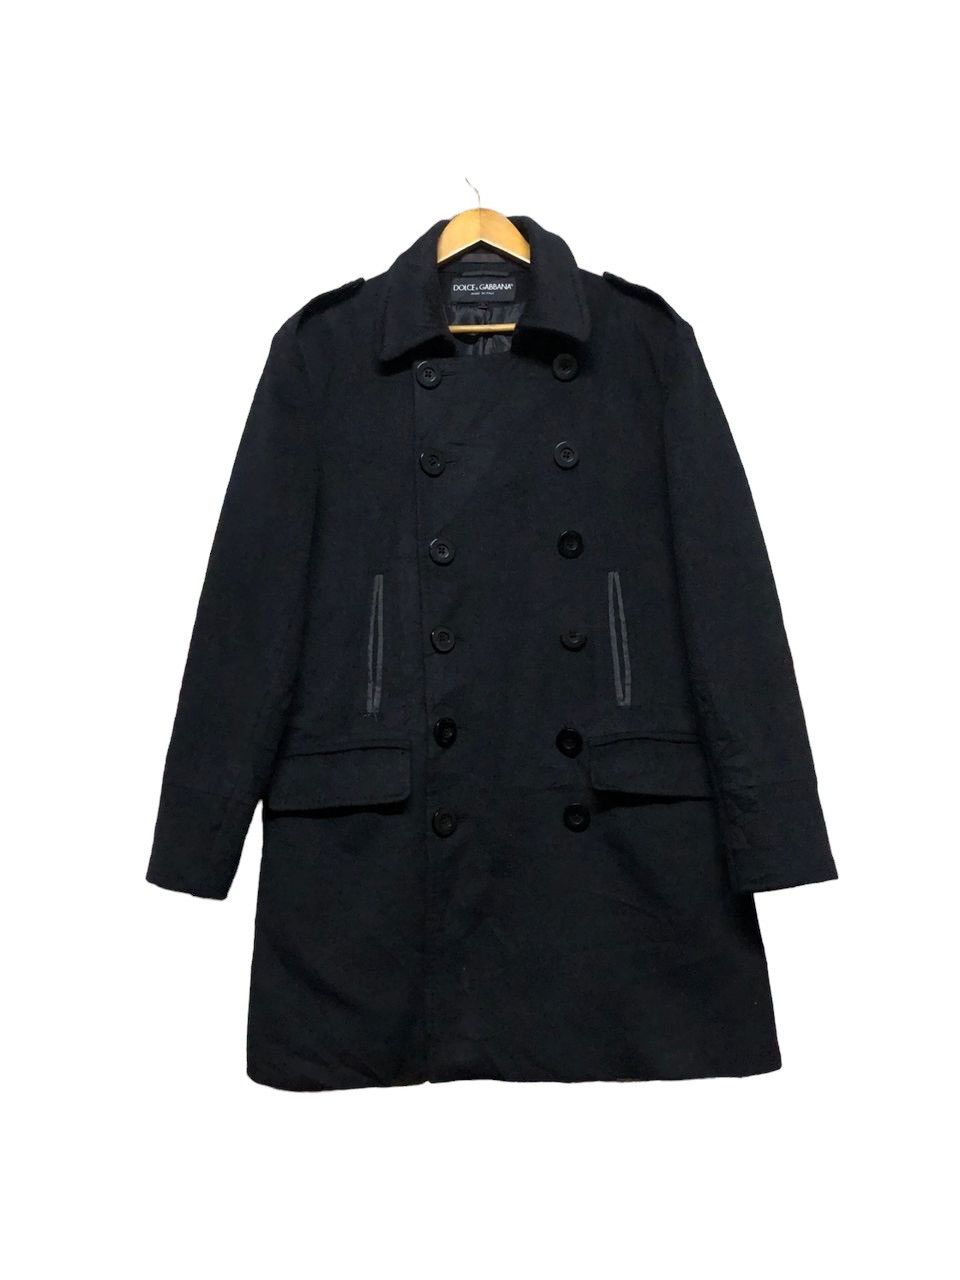 Dolce & Gabbana Wool Blend Double Breasted Overcoat - 1